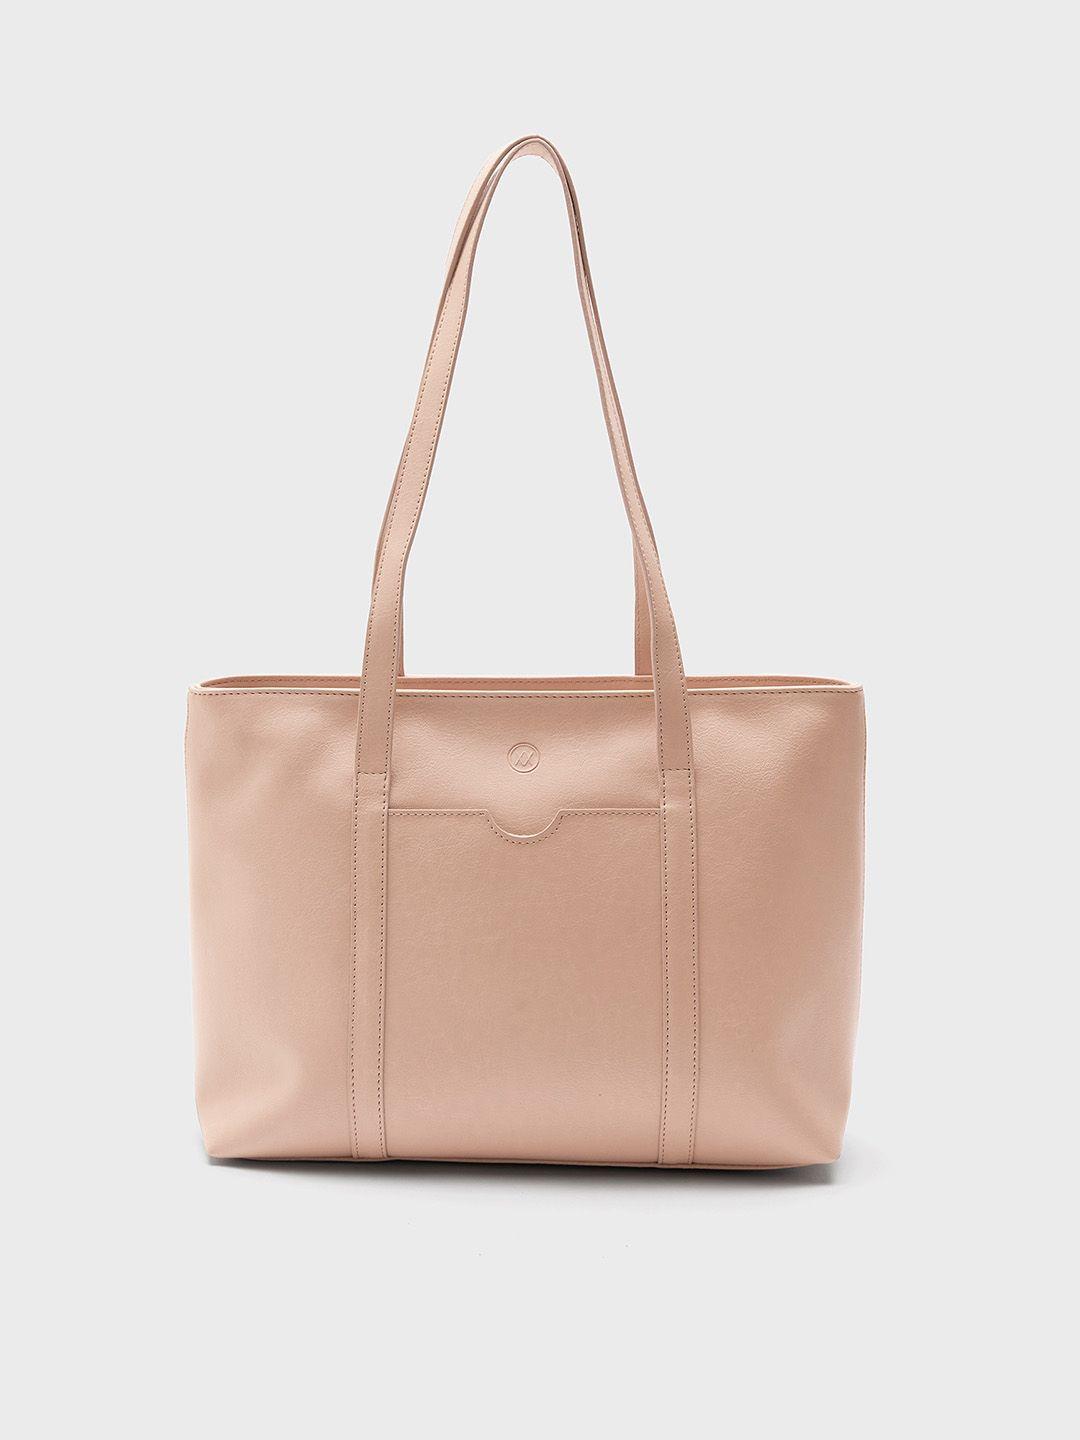 20dresses nude-coloured textured structured tote bag